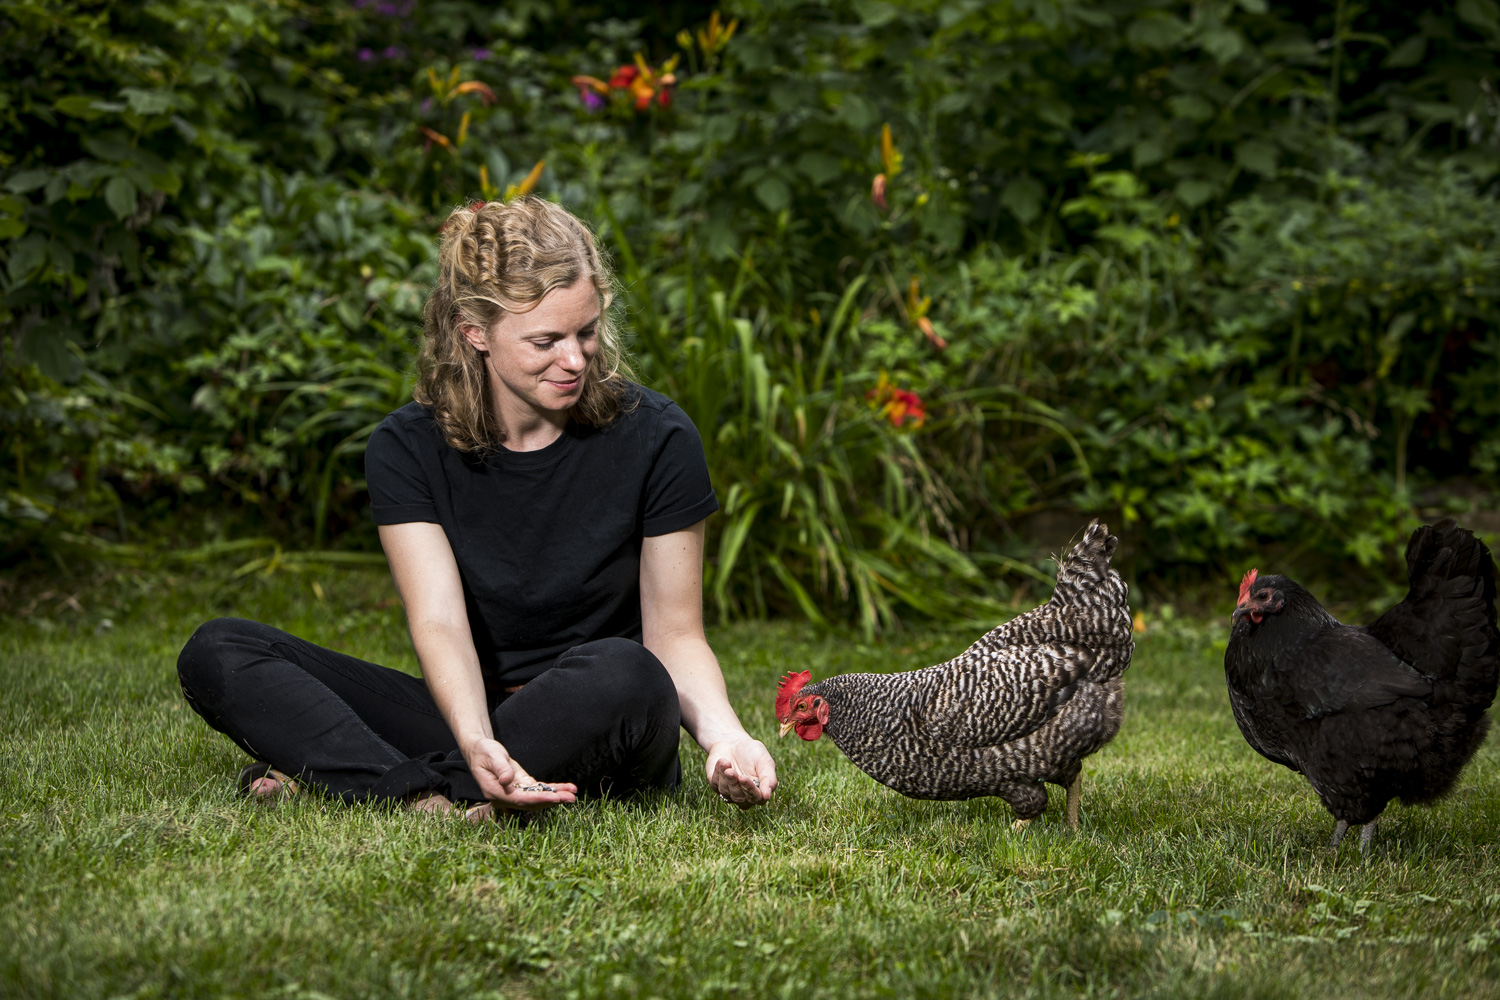 Cardman sitting in the grass with several of her chickens, photo by Steve Boyle